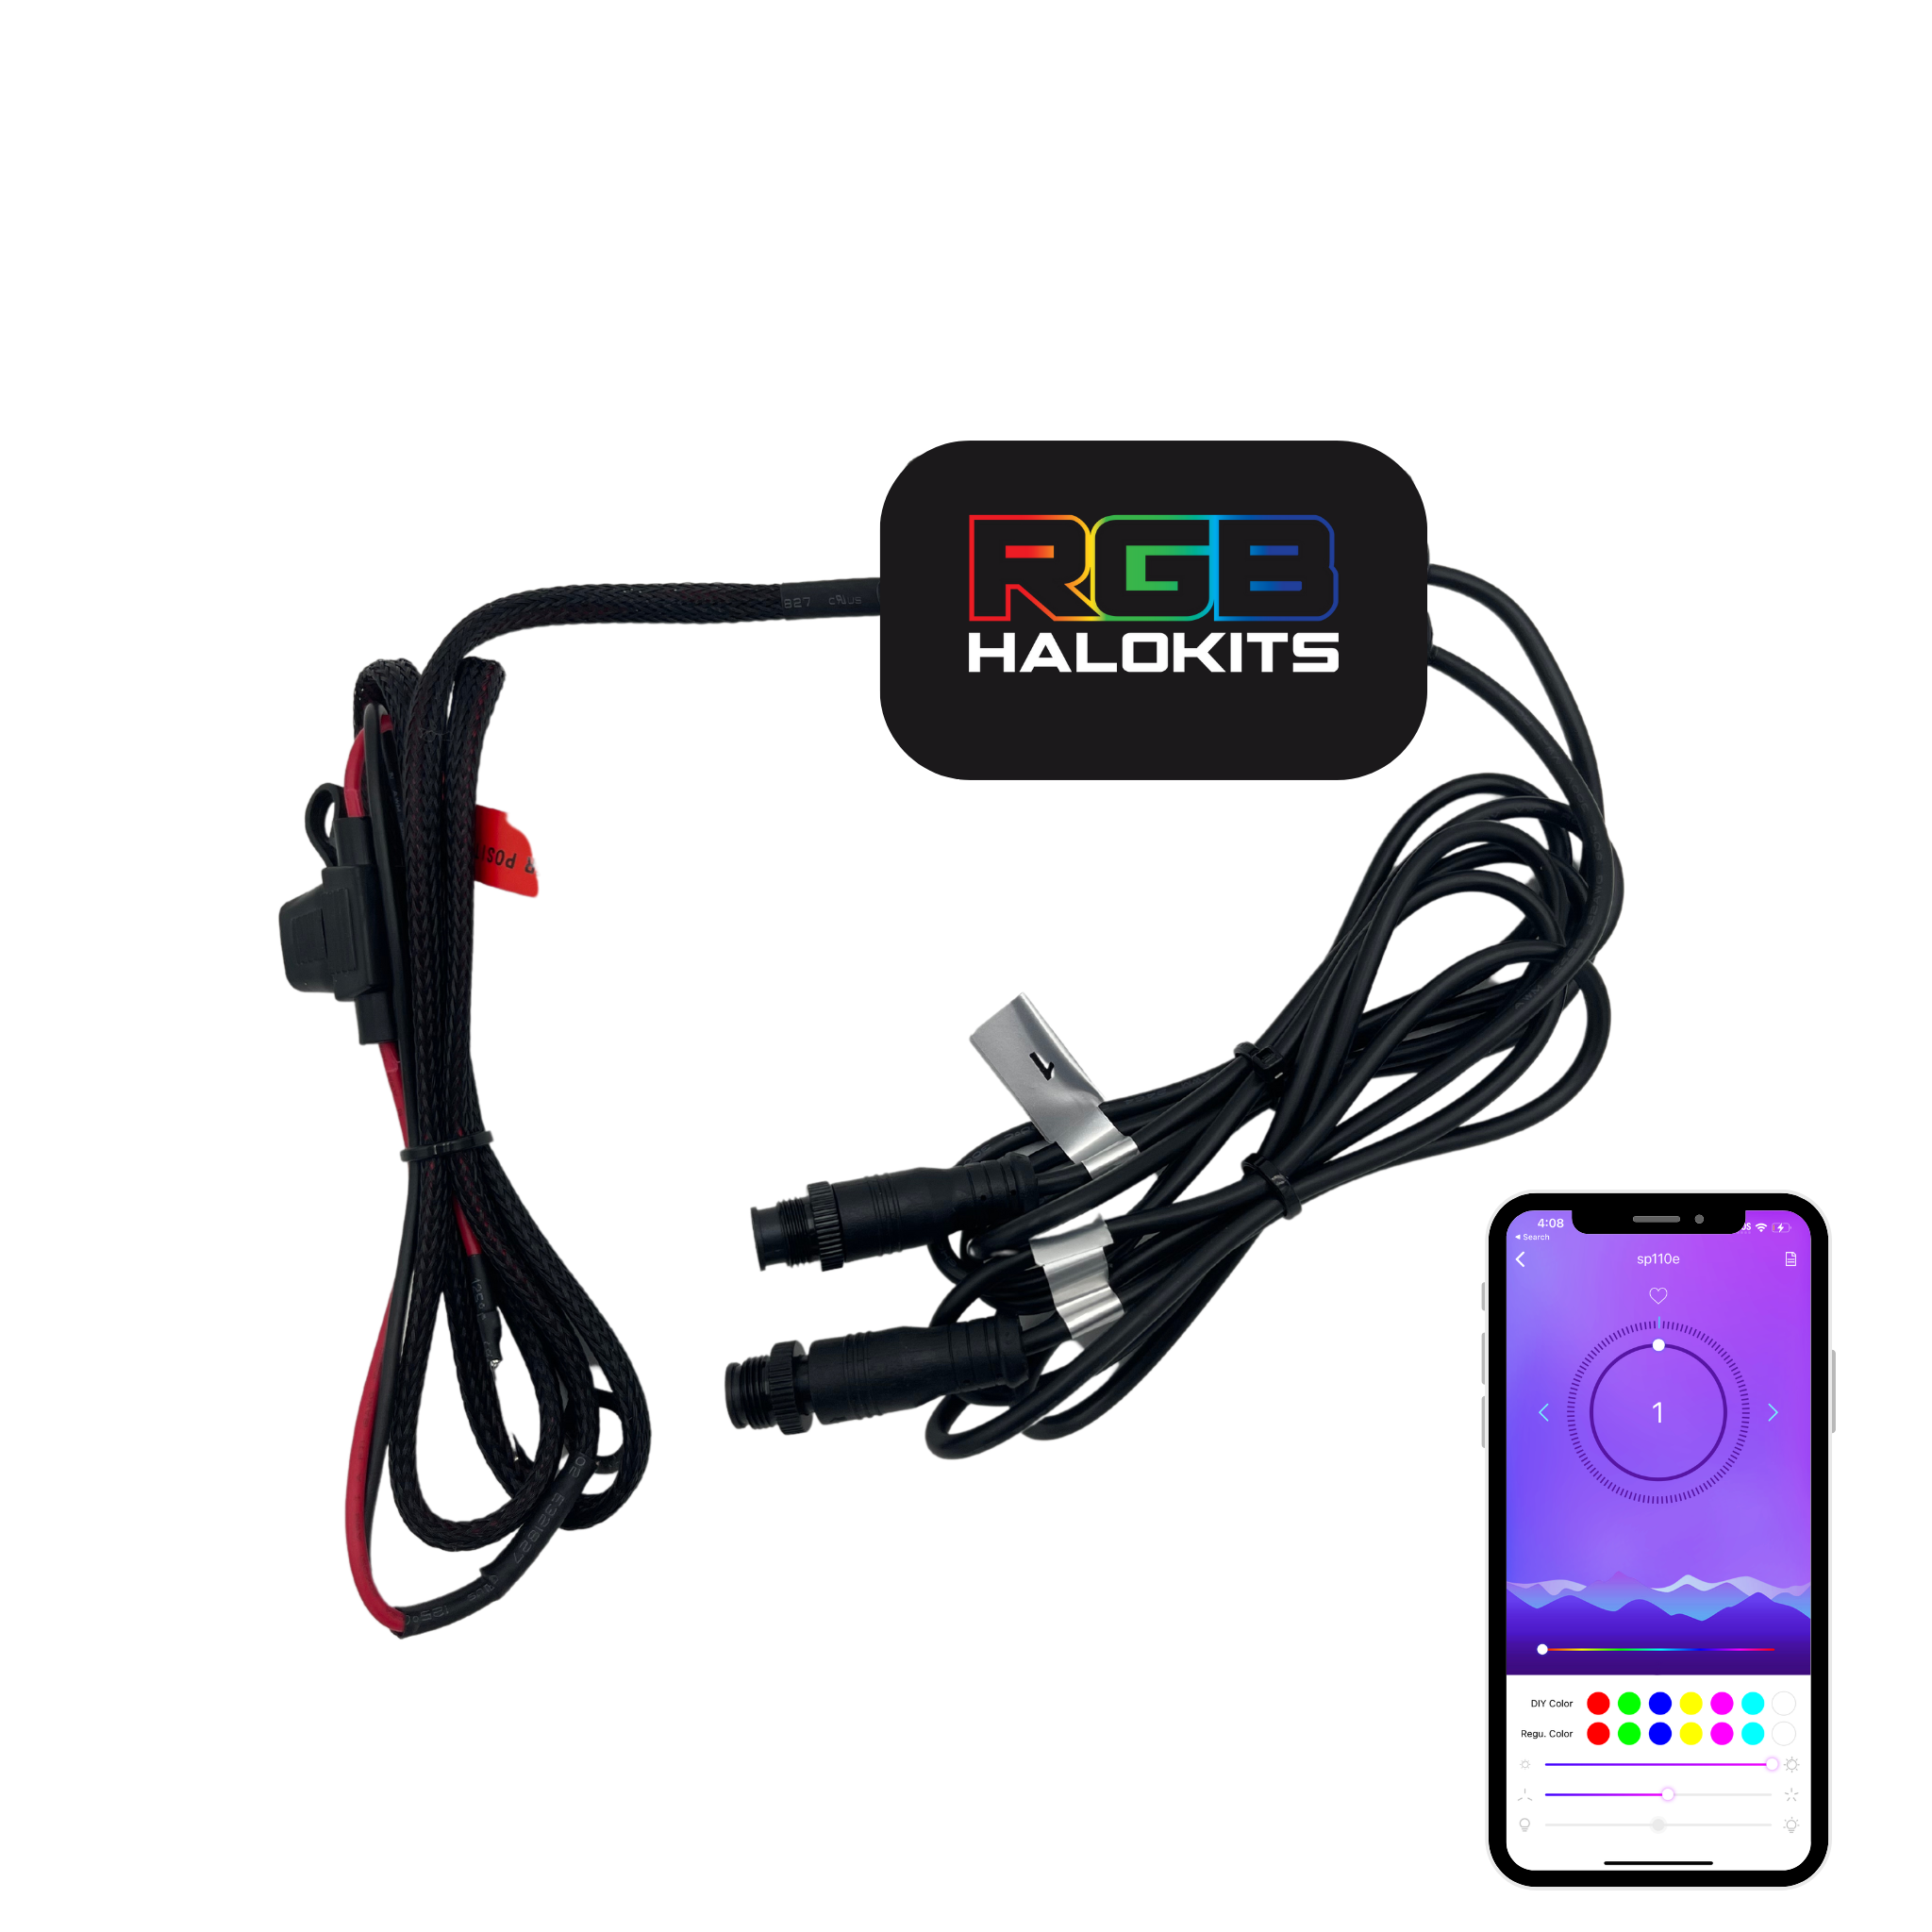 RGB Halo Kits Flow / LED Wheel Rings Add Bluetooth Controller to my Previous Order